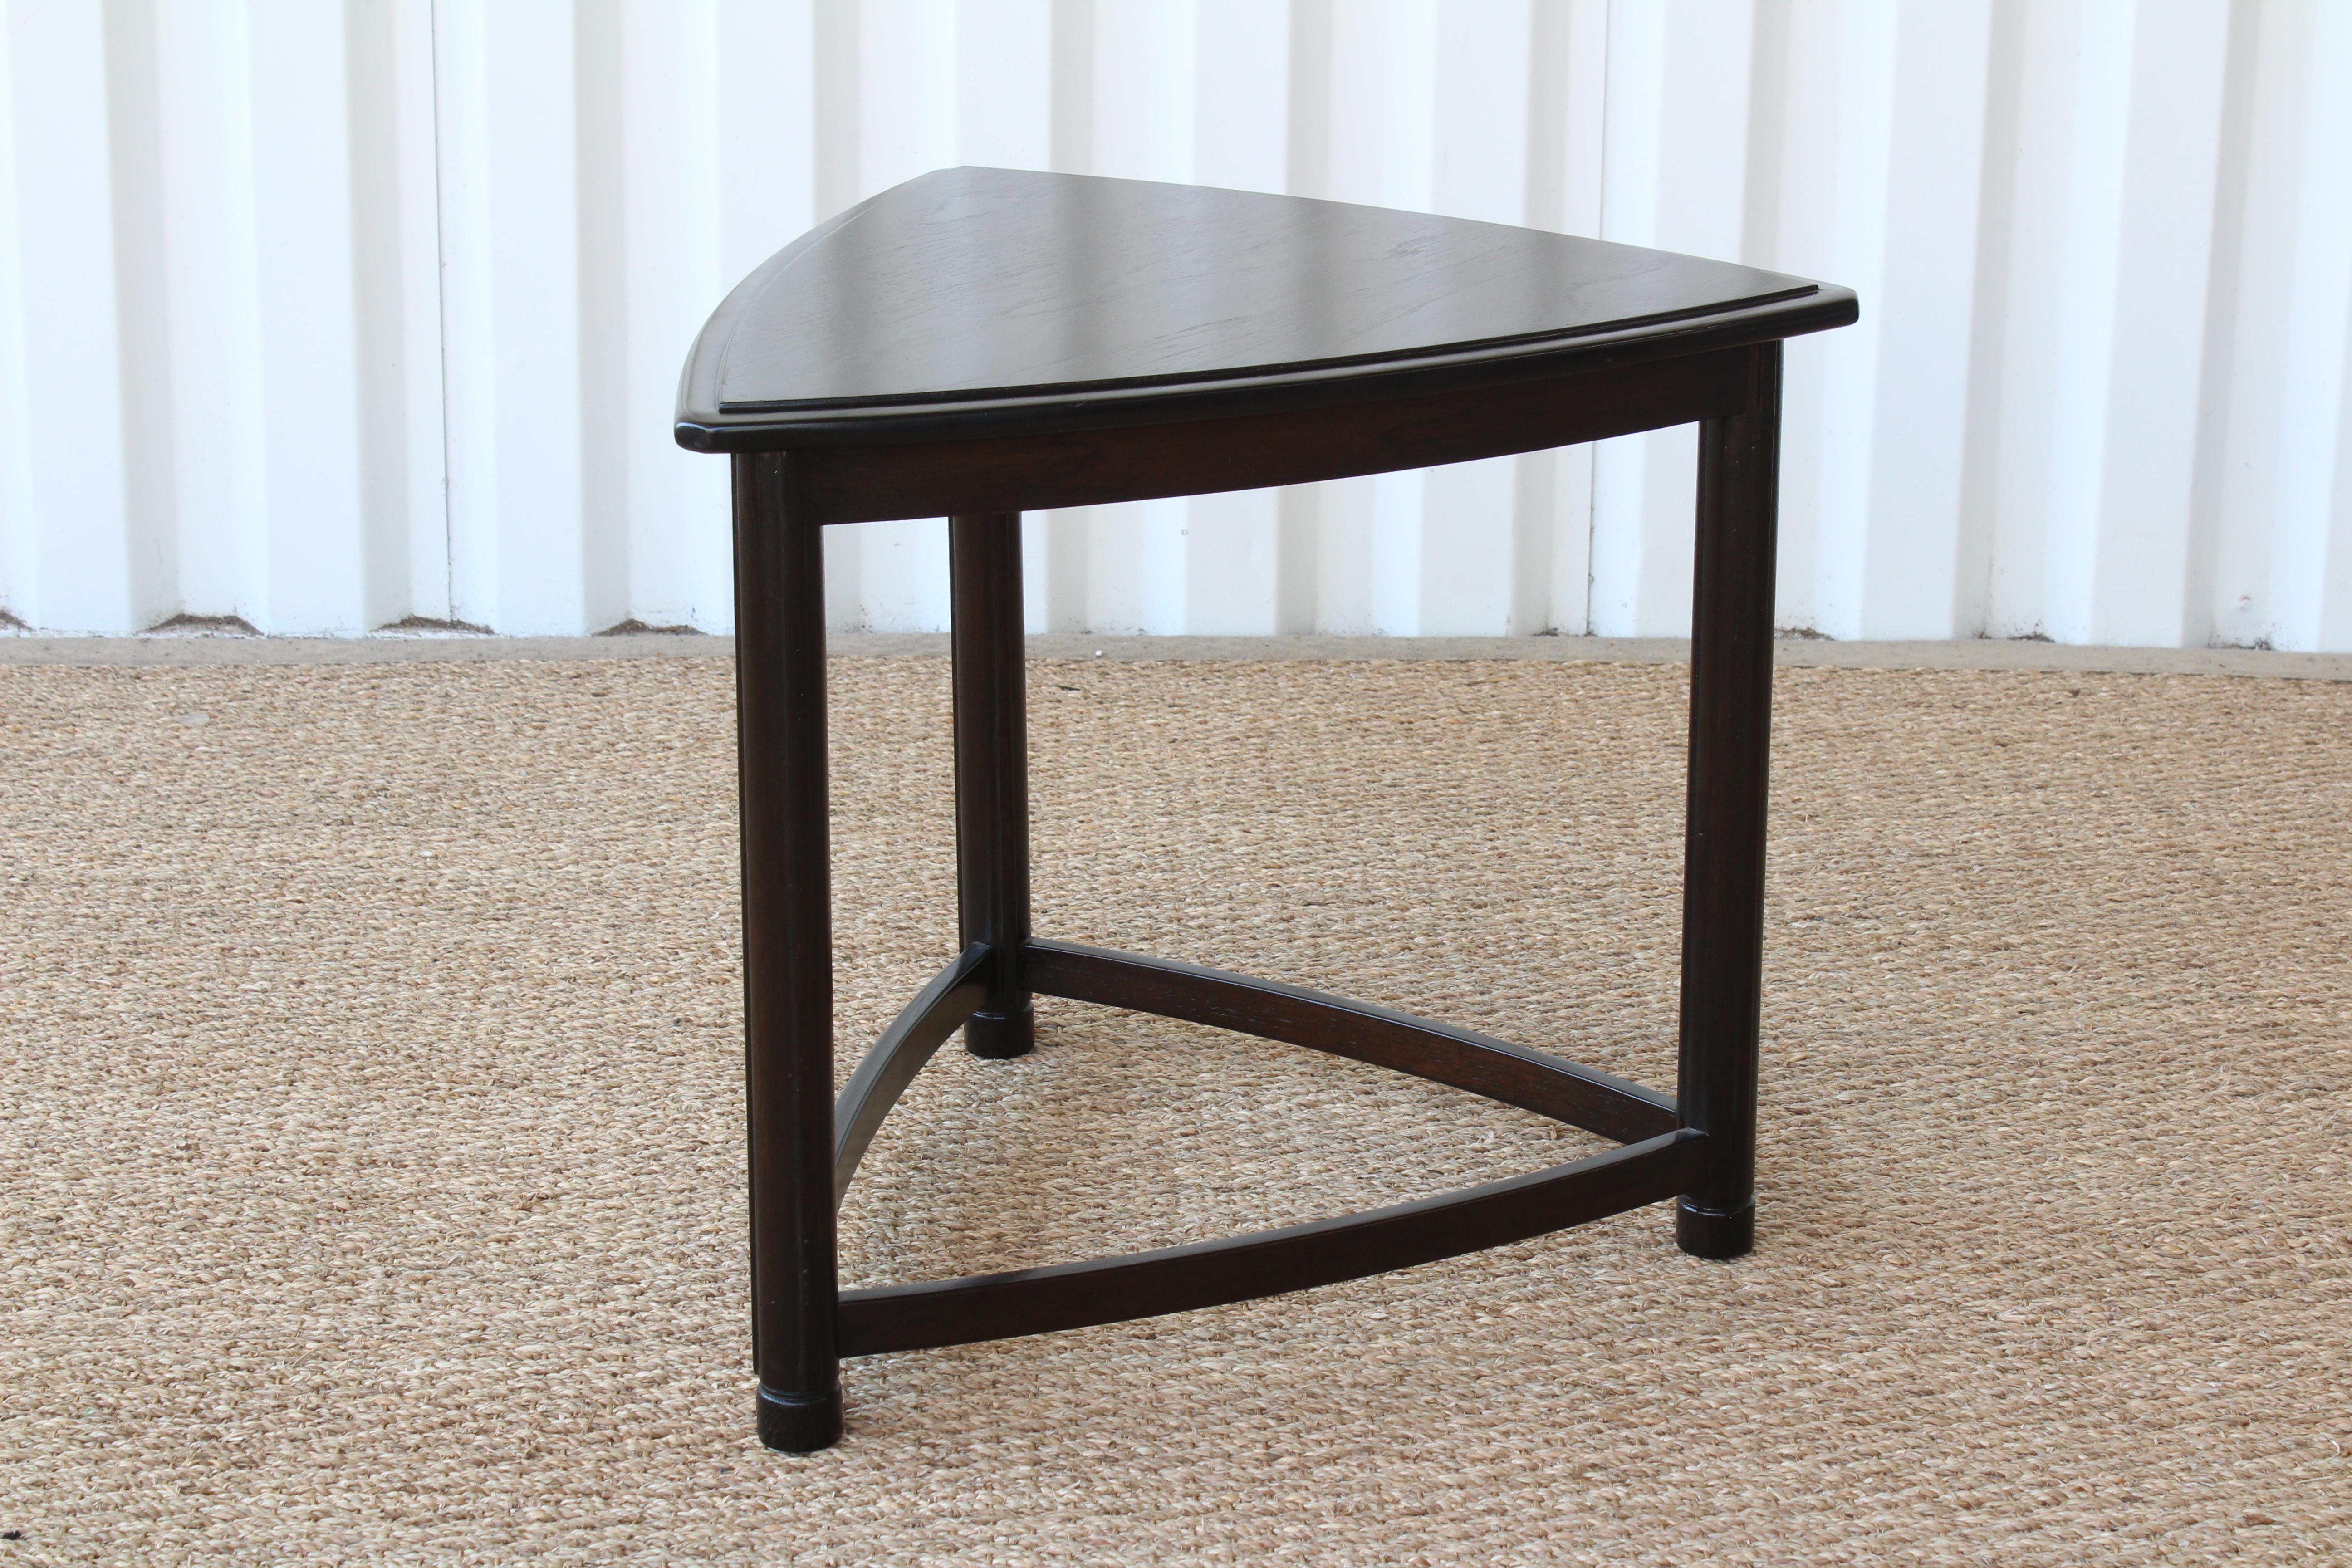 Walnut three sided occasional table by Heritage Henredon. Newly refinished in a dark stain.